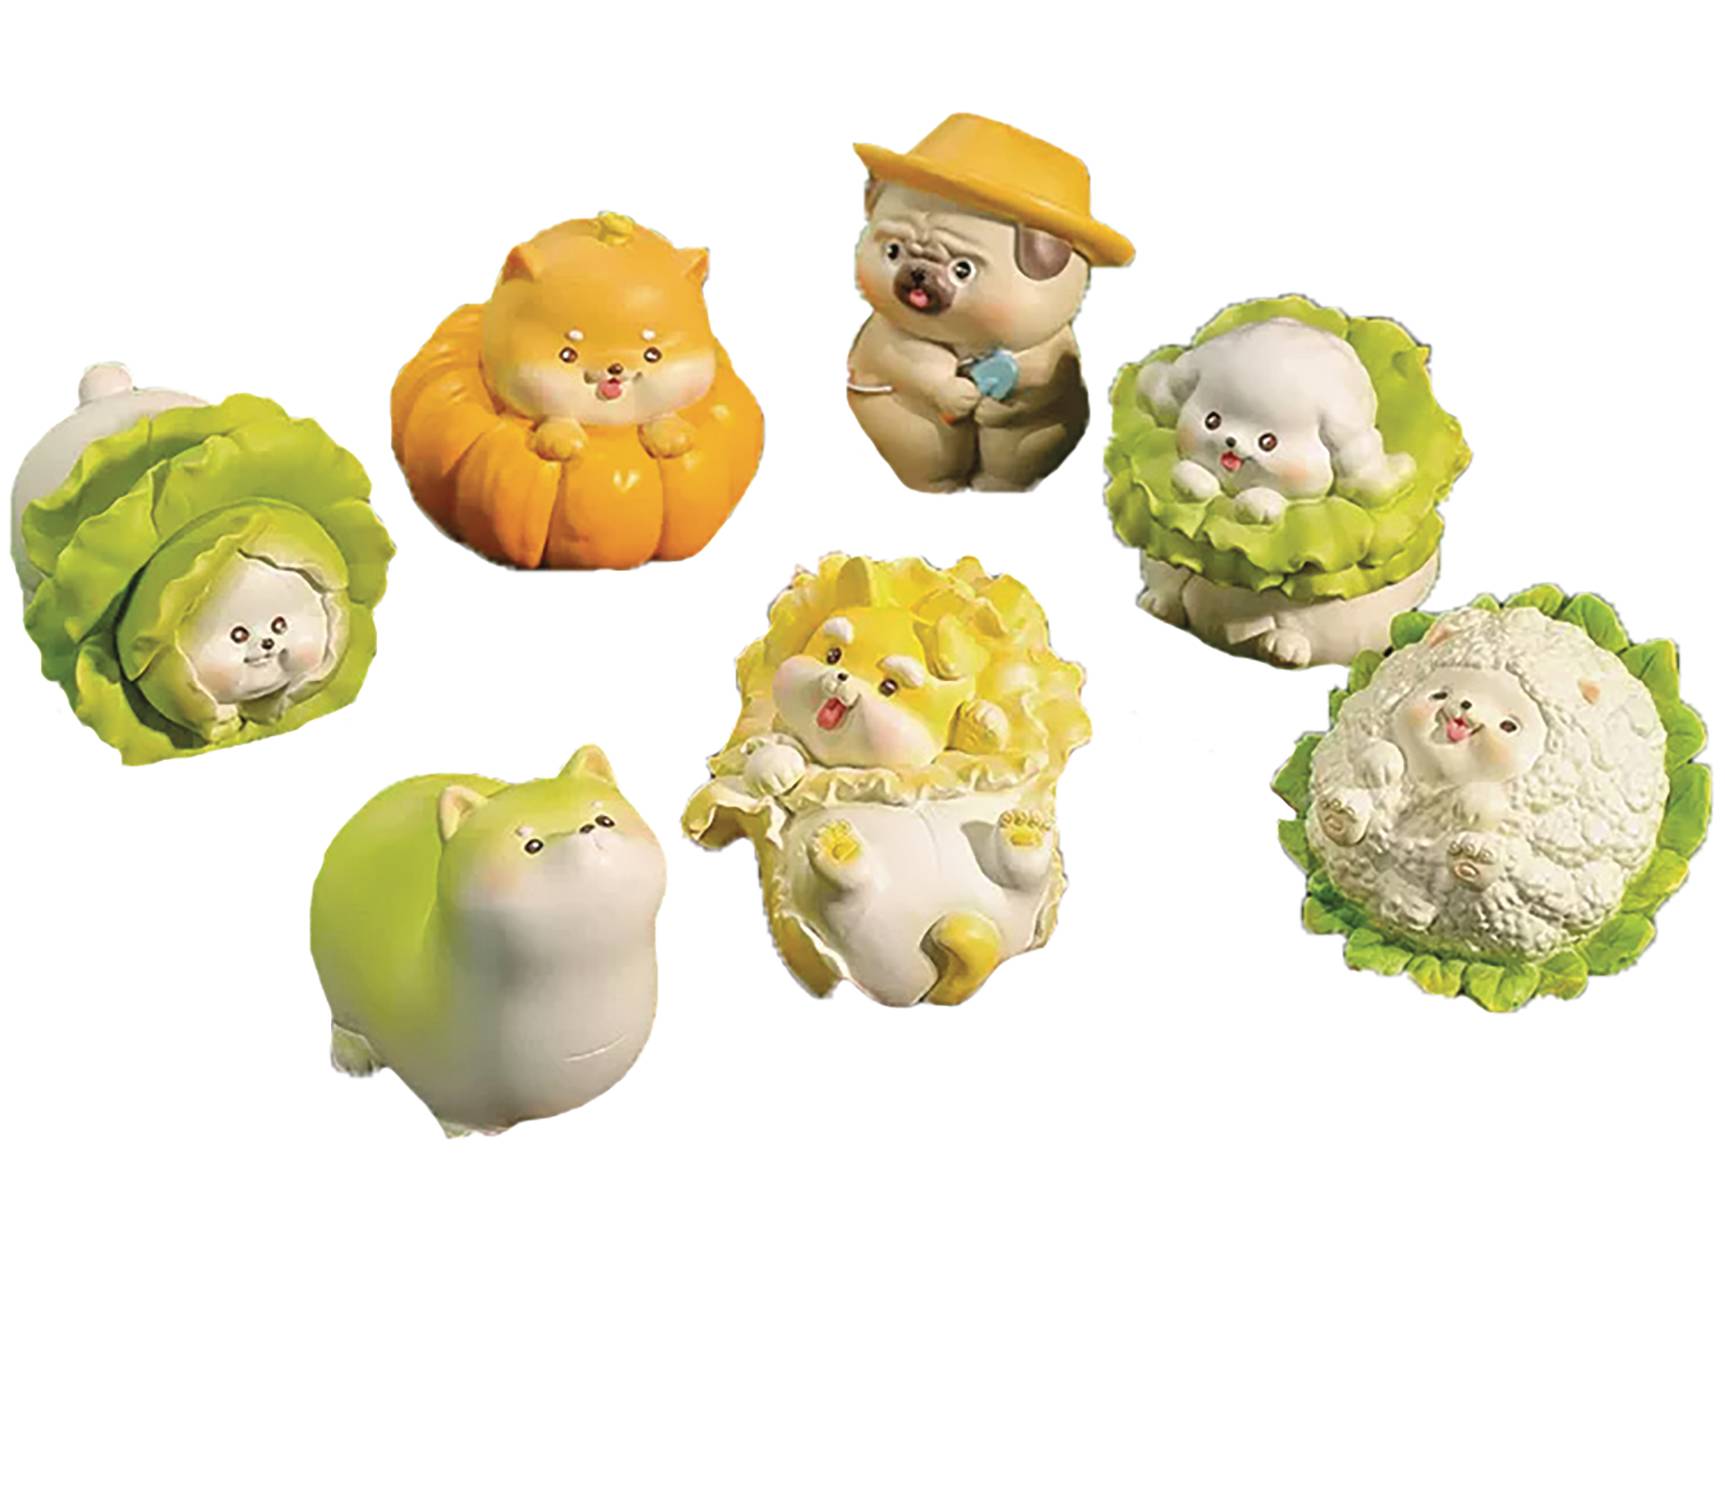 BABY STORY WORLD OF VEGETABLE 6PC BMB DS